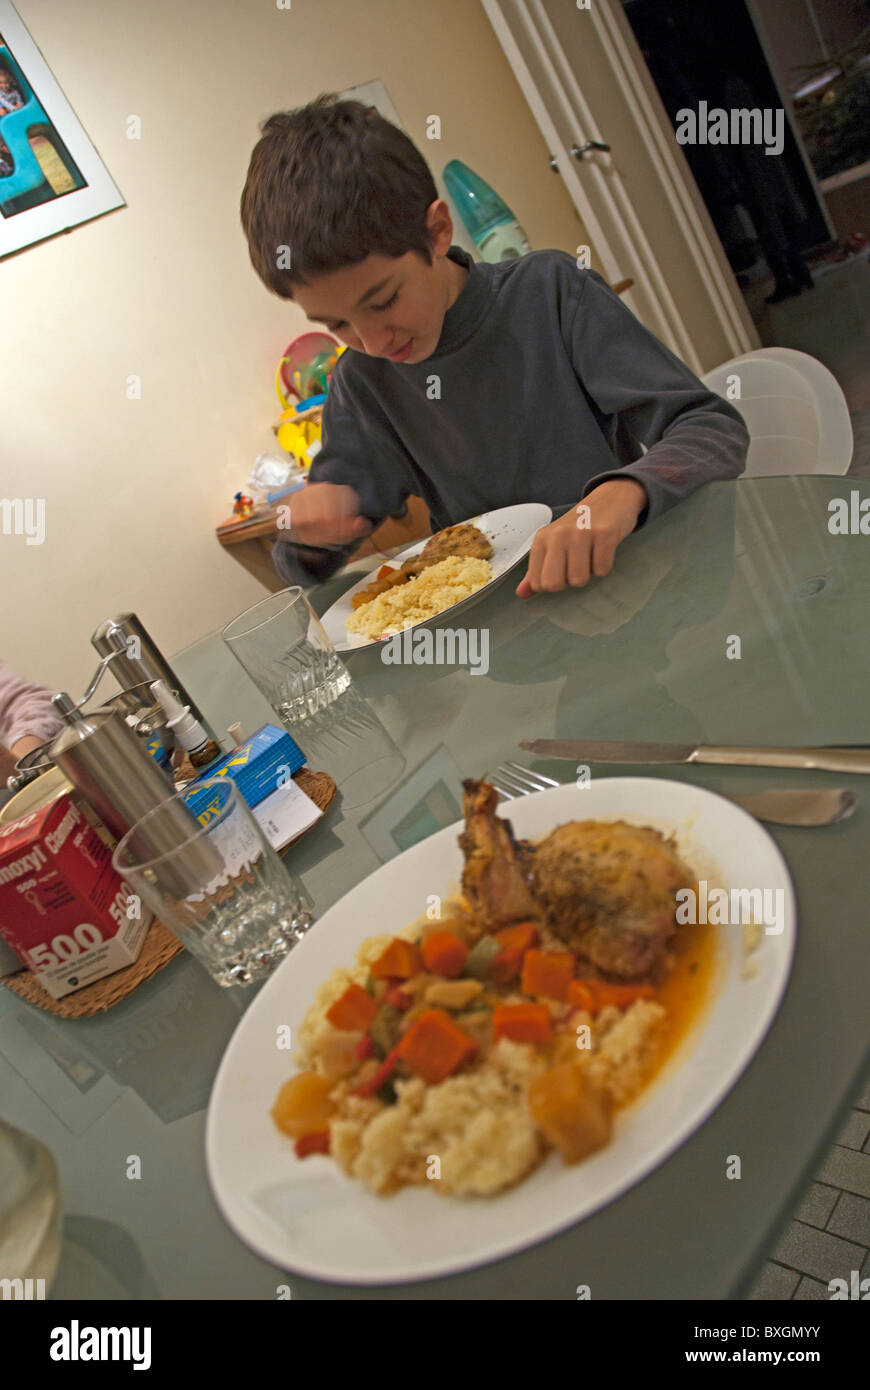 Boy eating dinner at the kitchen table, France. Stock Photo